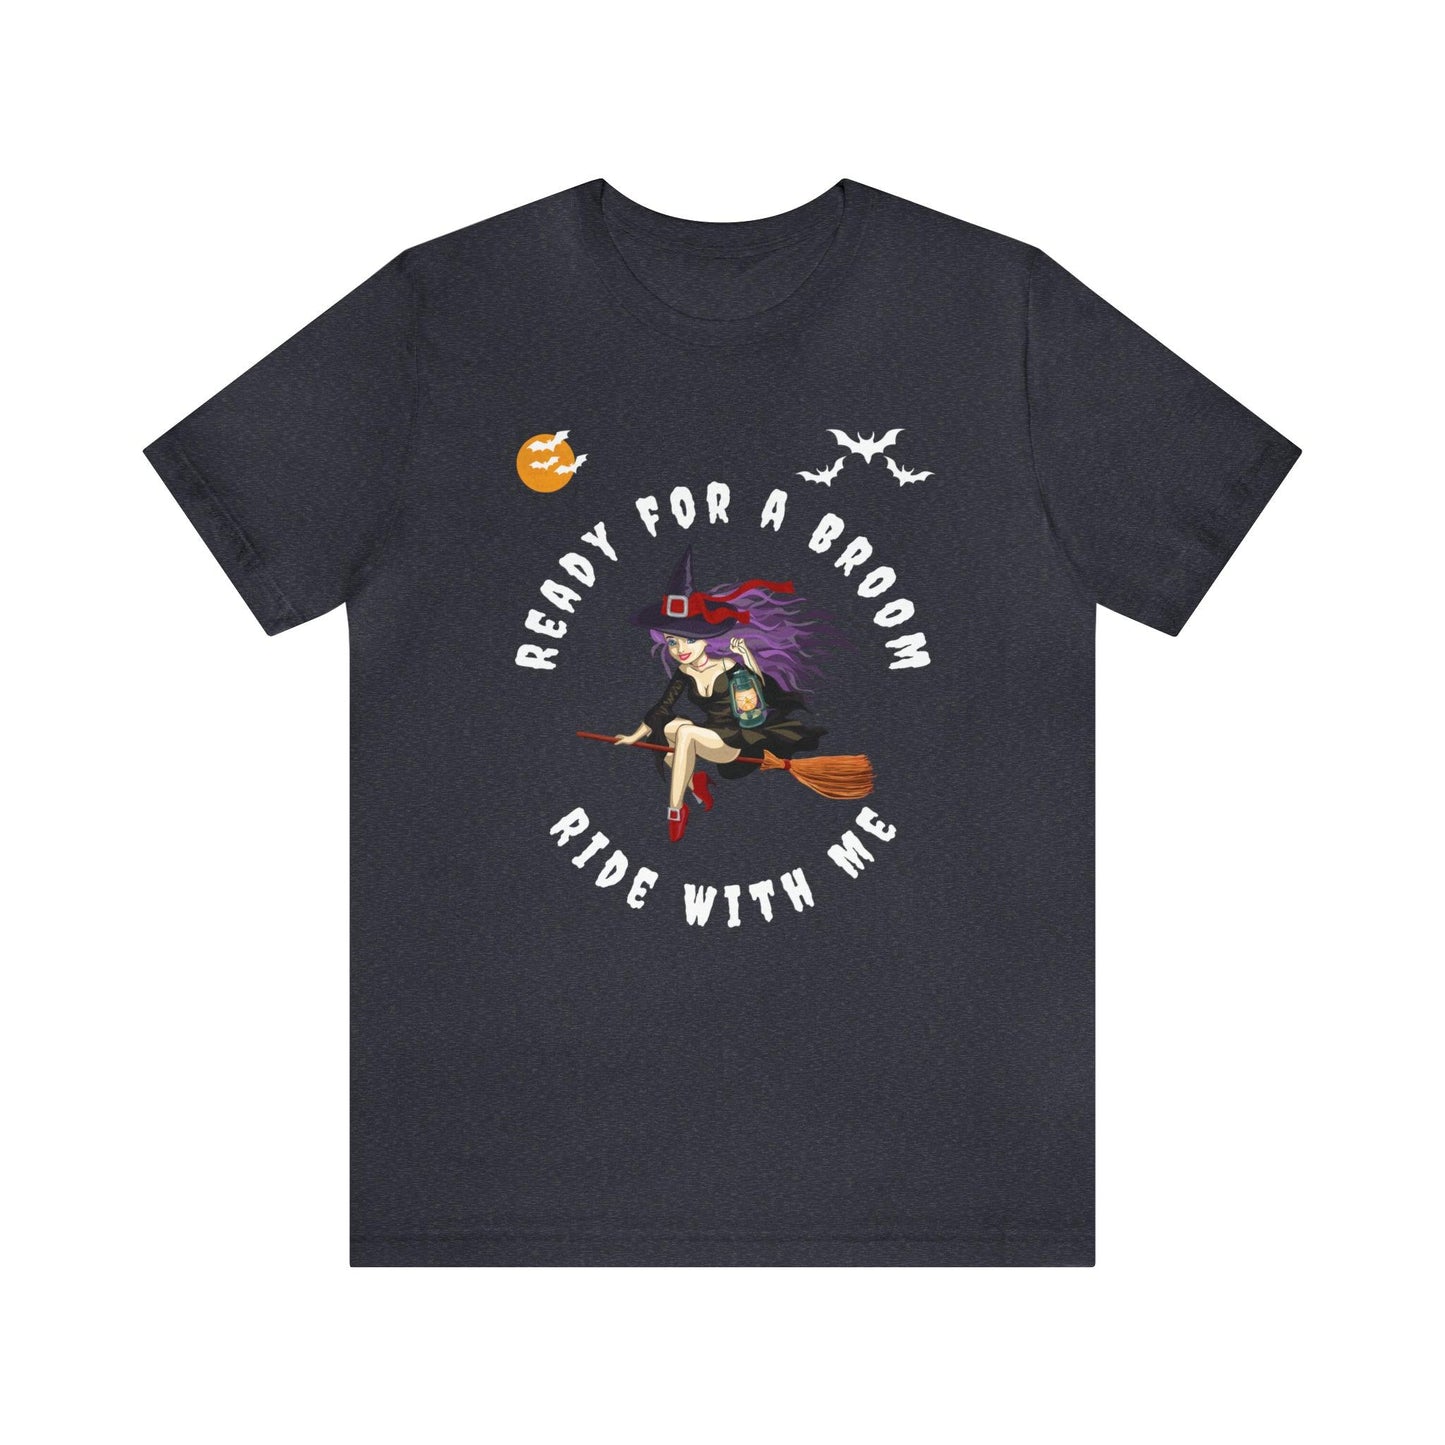 Ready for a Broom Ride with Me Halloween shirt, Witch shirt, Halloween tshirt, Halloween outfit, Work Halloween Costume